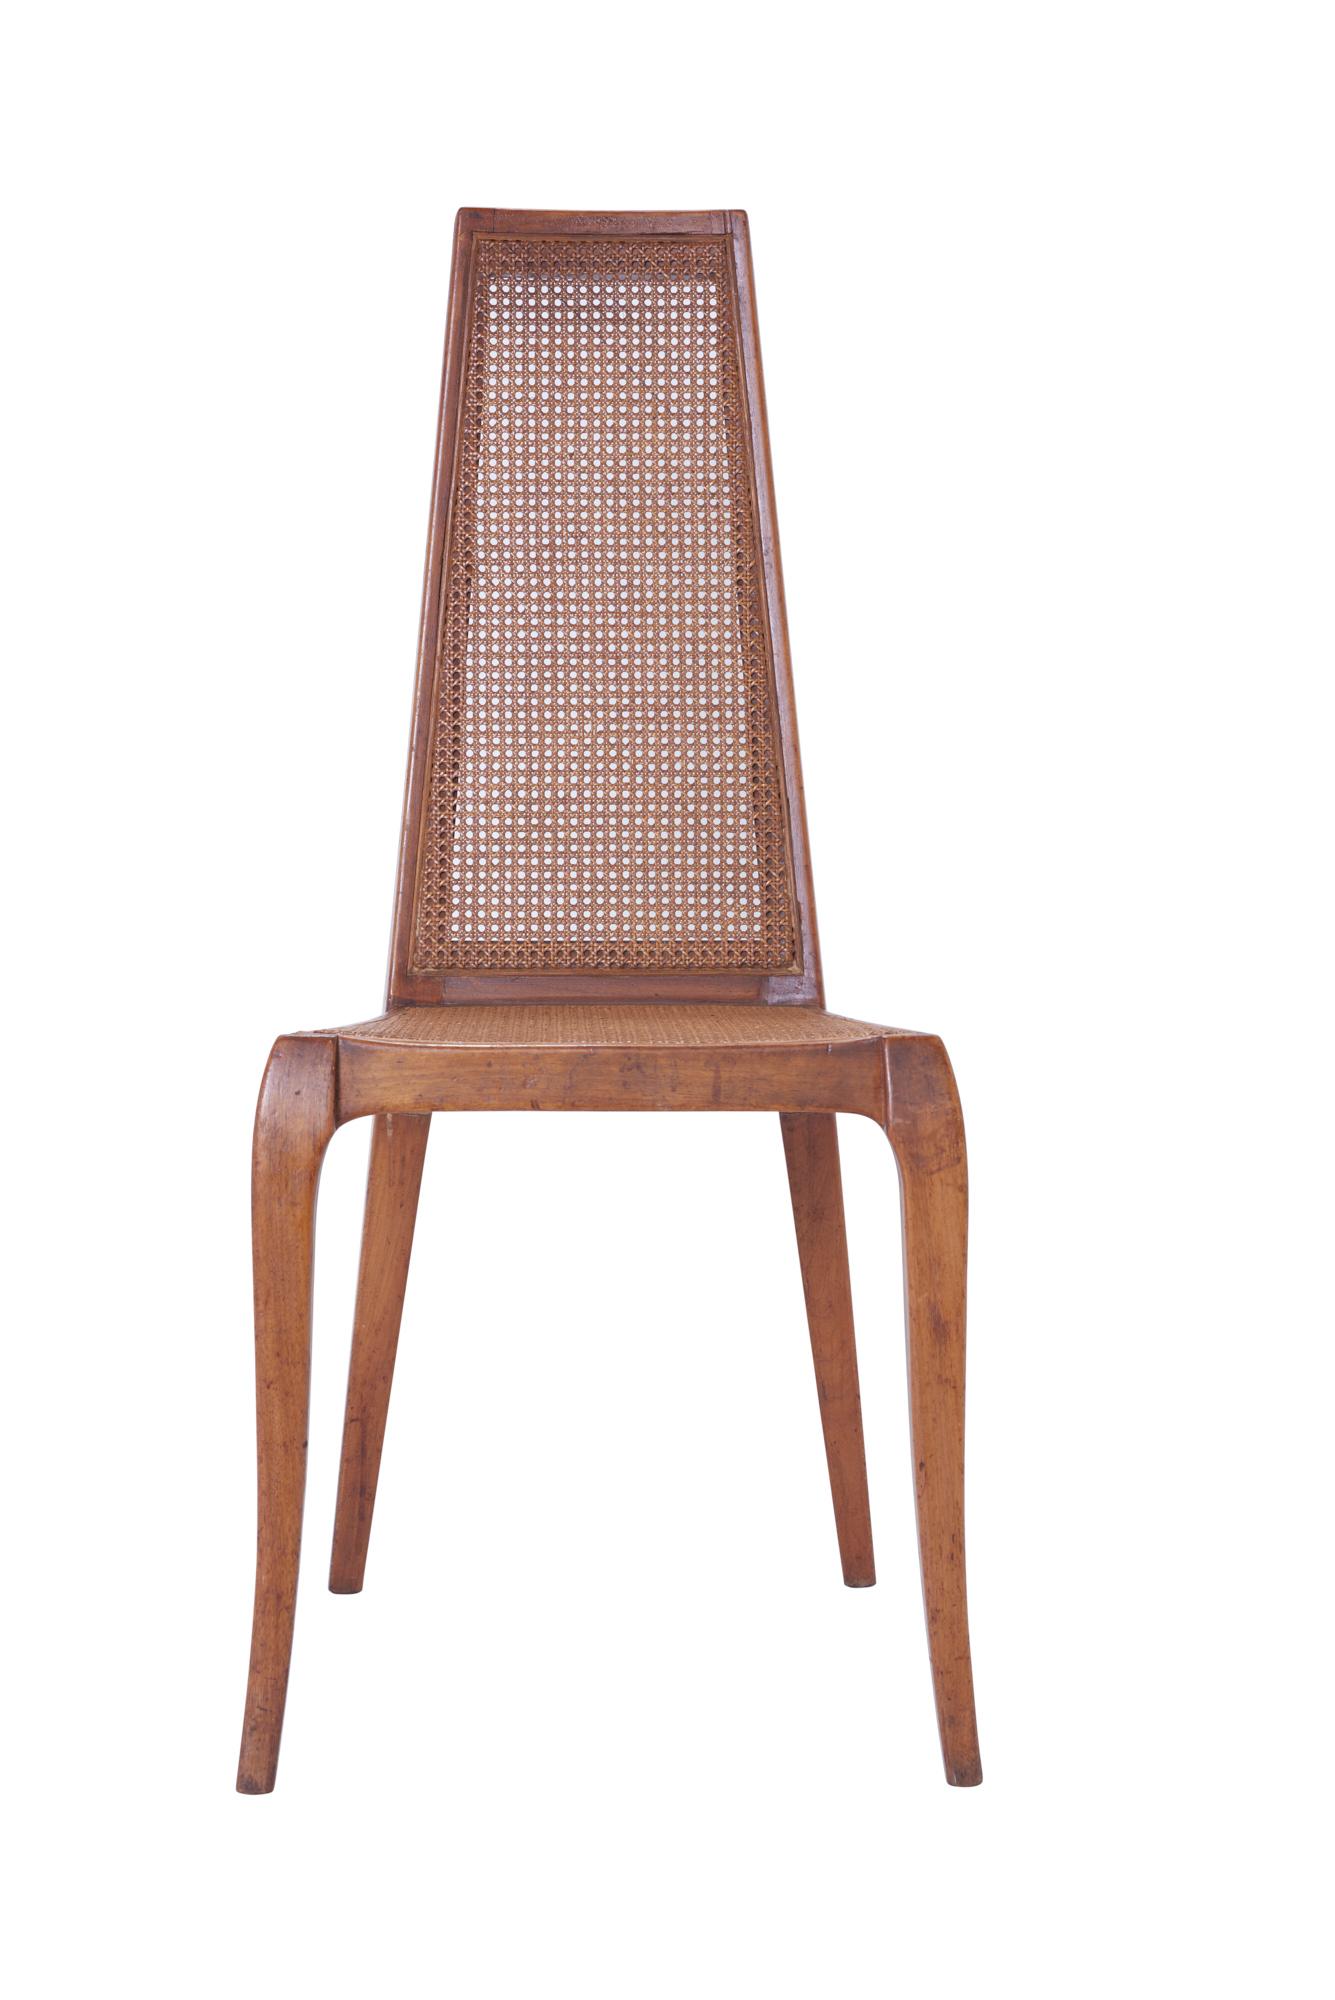 These Mid-Century Modern caned chairs are constructed from dynamically-shaped walnut.

Since Schumacher was founded in 1889, our family-owned company has been synonymous with style, taste, and innovation. A passion for luxury and an unwavering